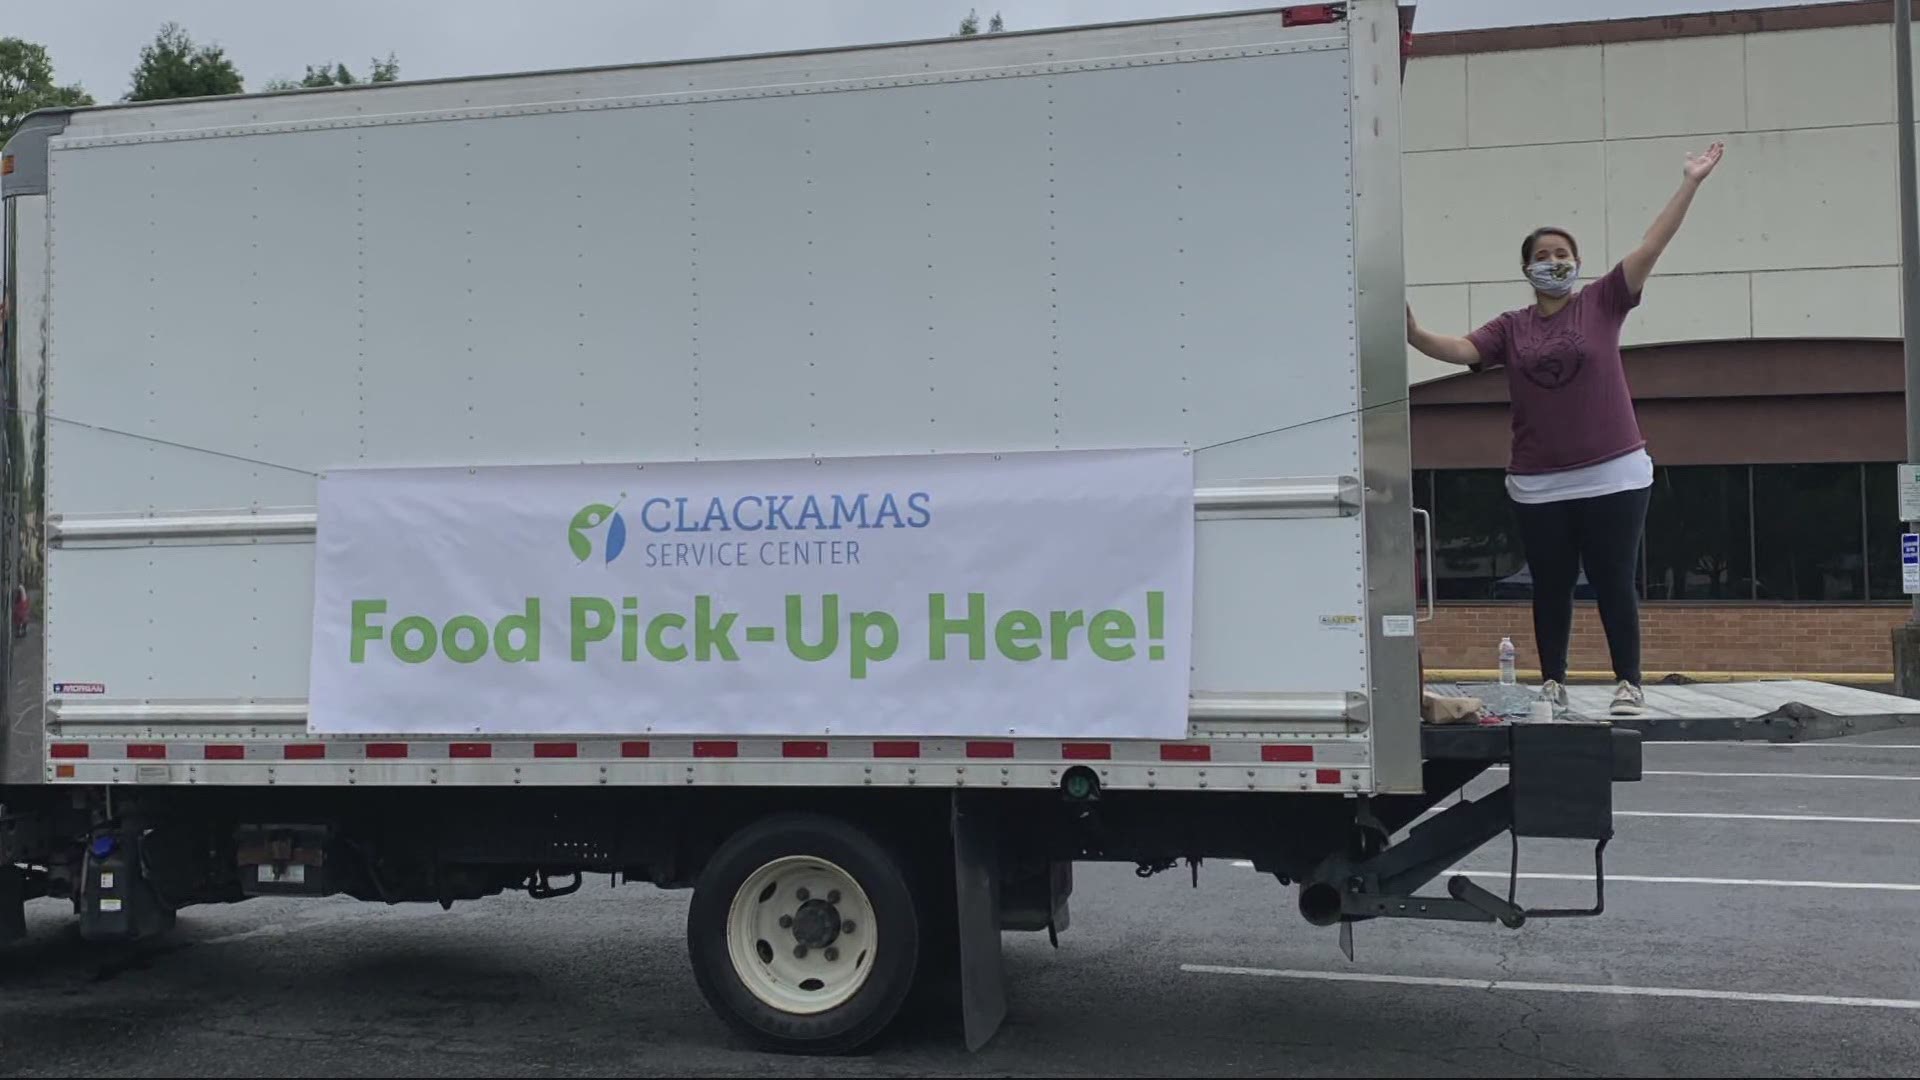 Brittany Falkers takes us to the Clackamas Service Center, where they are used to adapting to feed the hungry in the community.